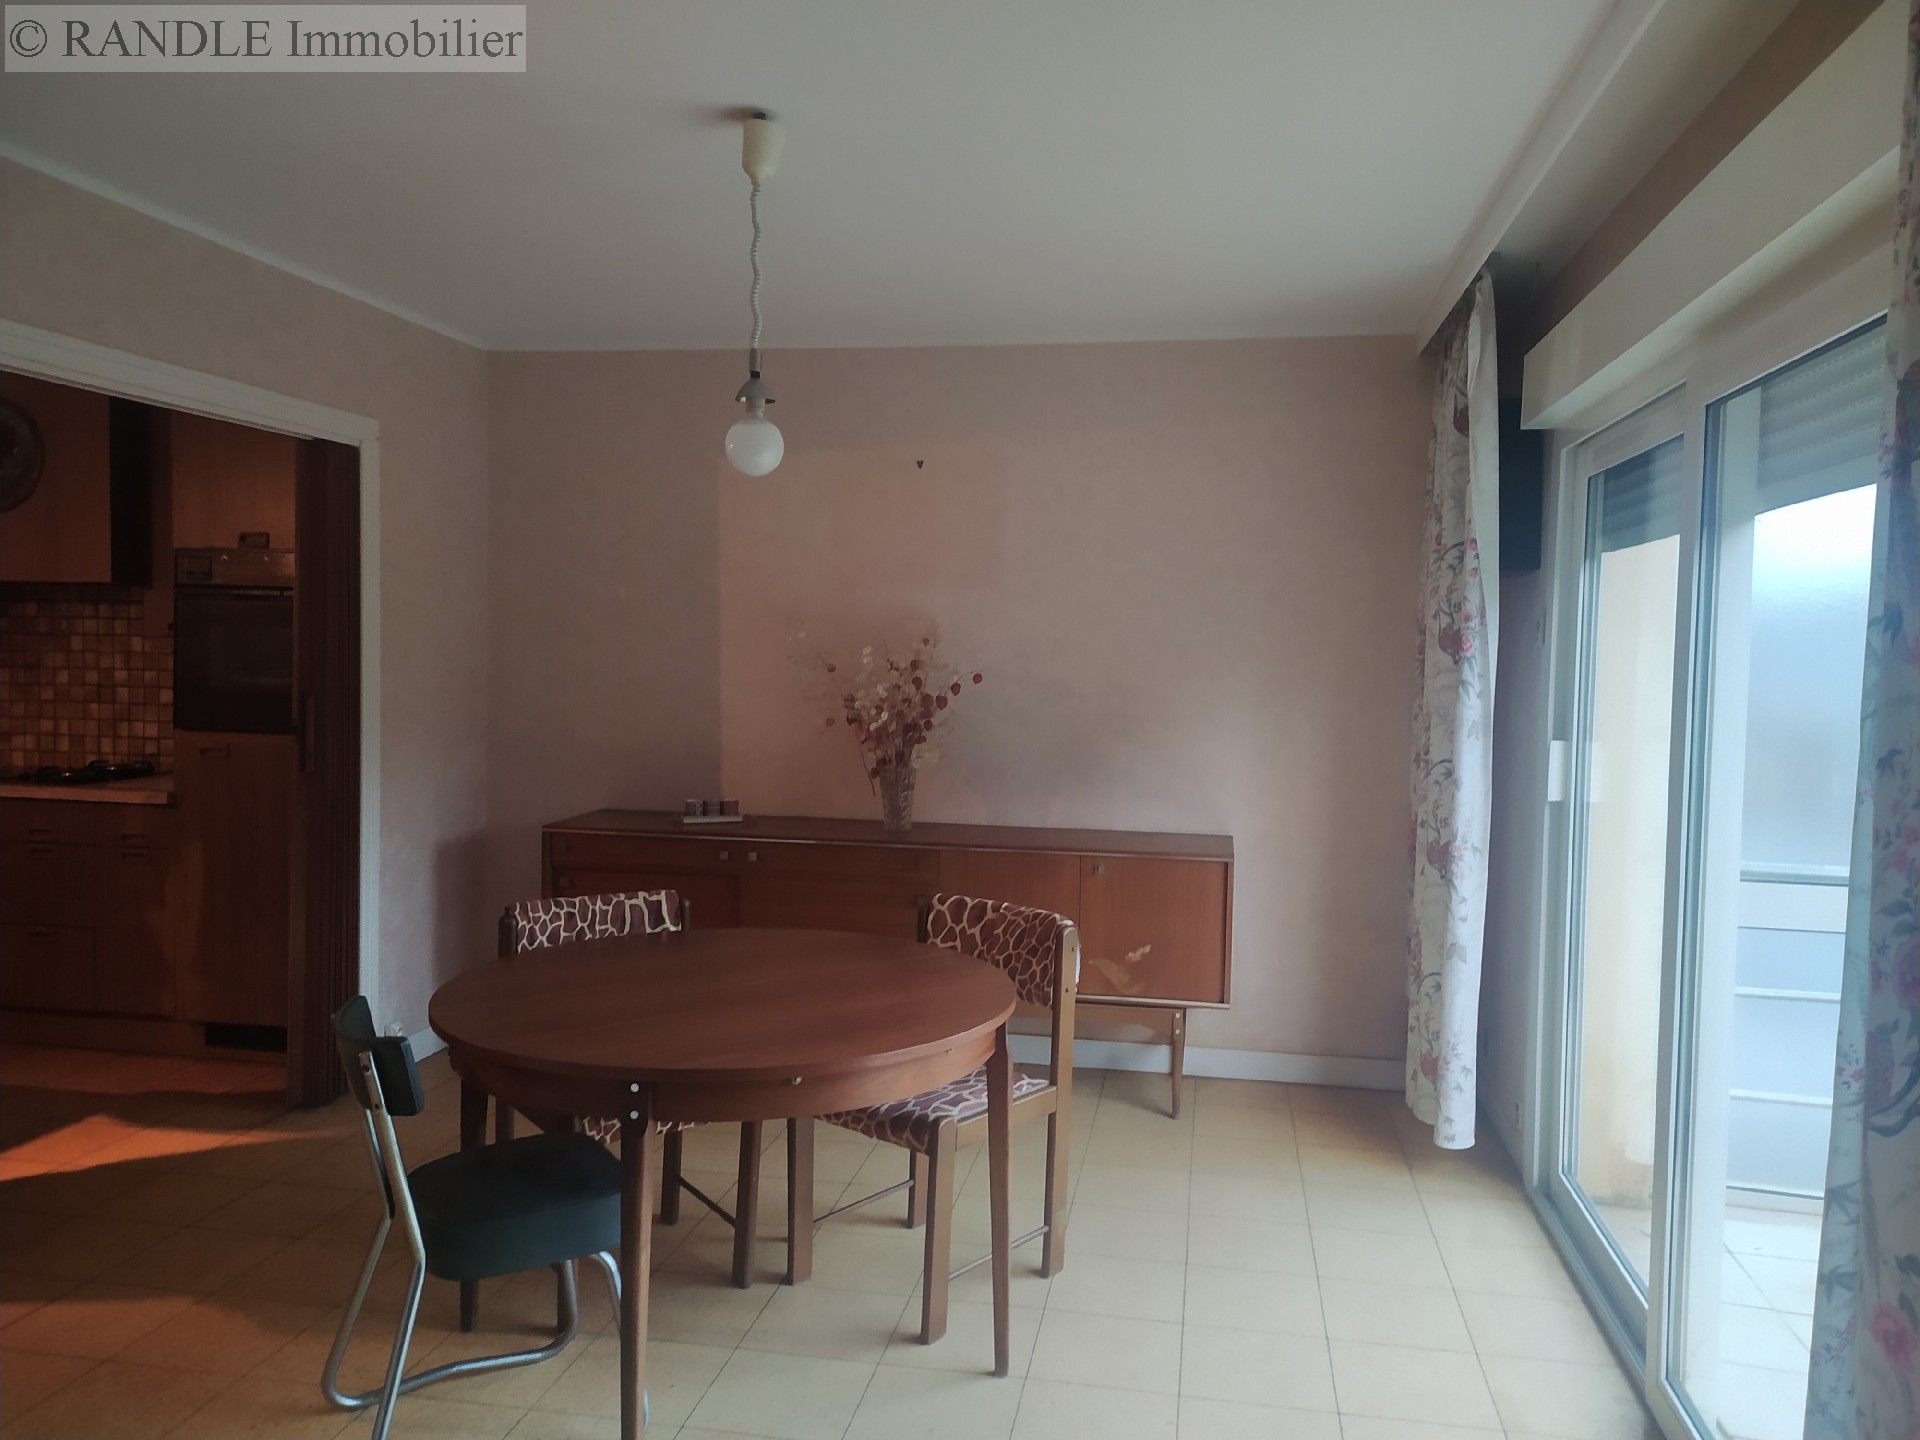 Sell city house - BANNALEC 103 m², 5 rooms